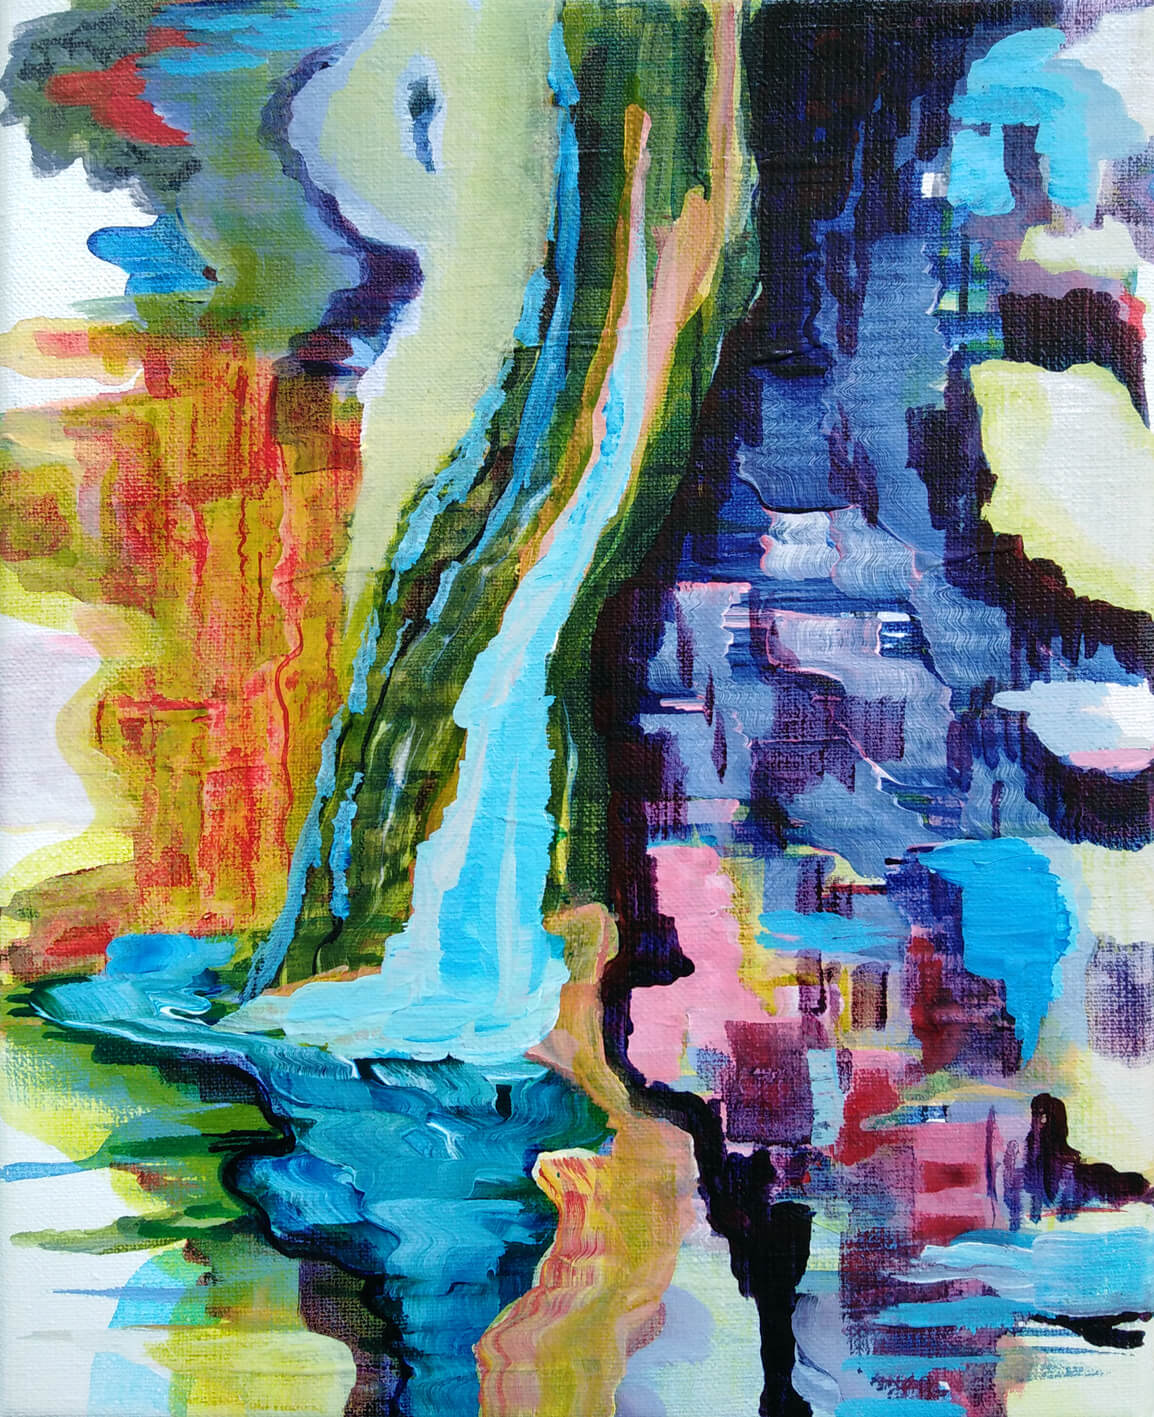 Weeping Willow by the water Bank Gea Zwart Painting 2022